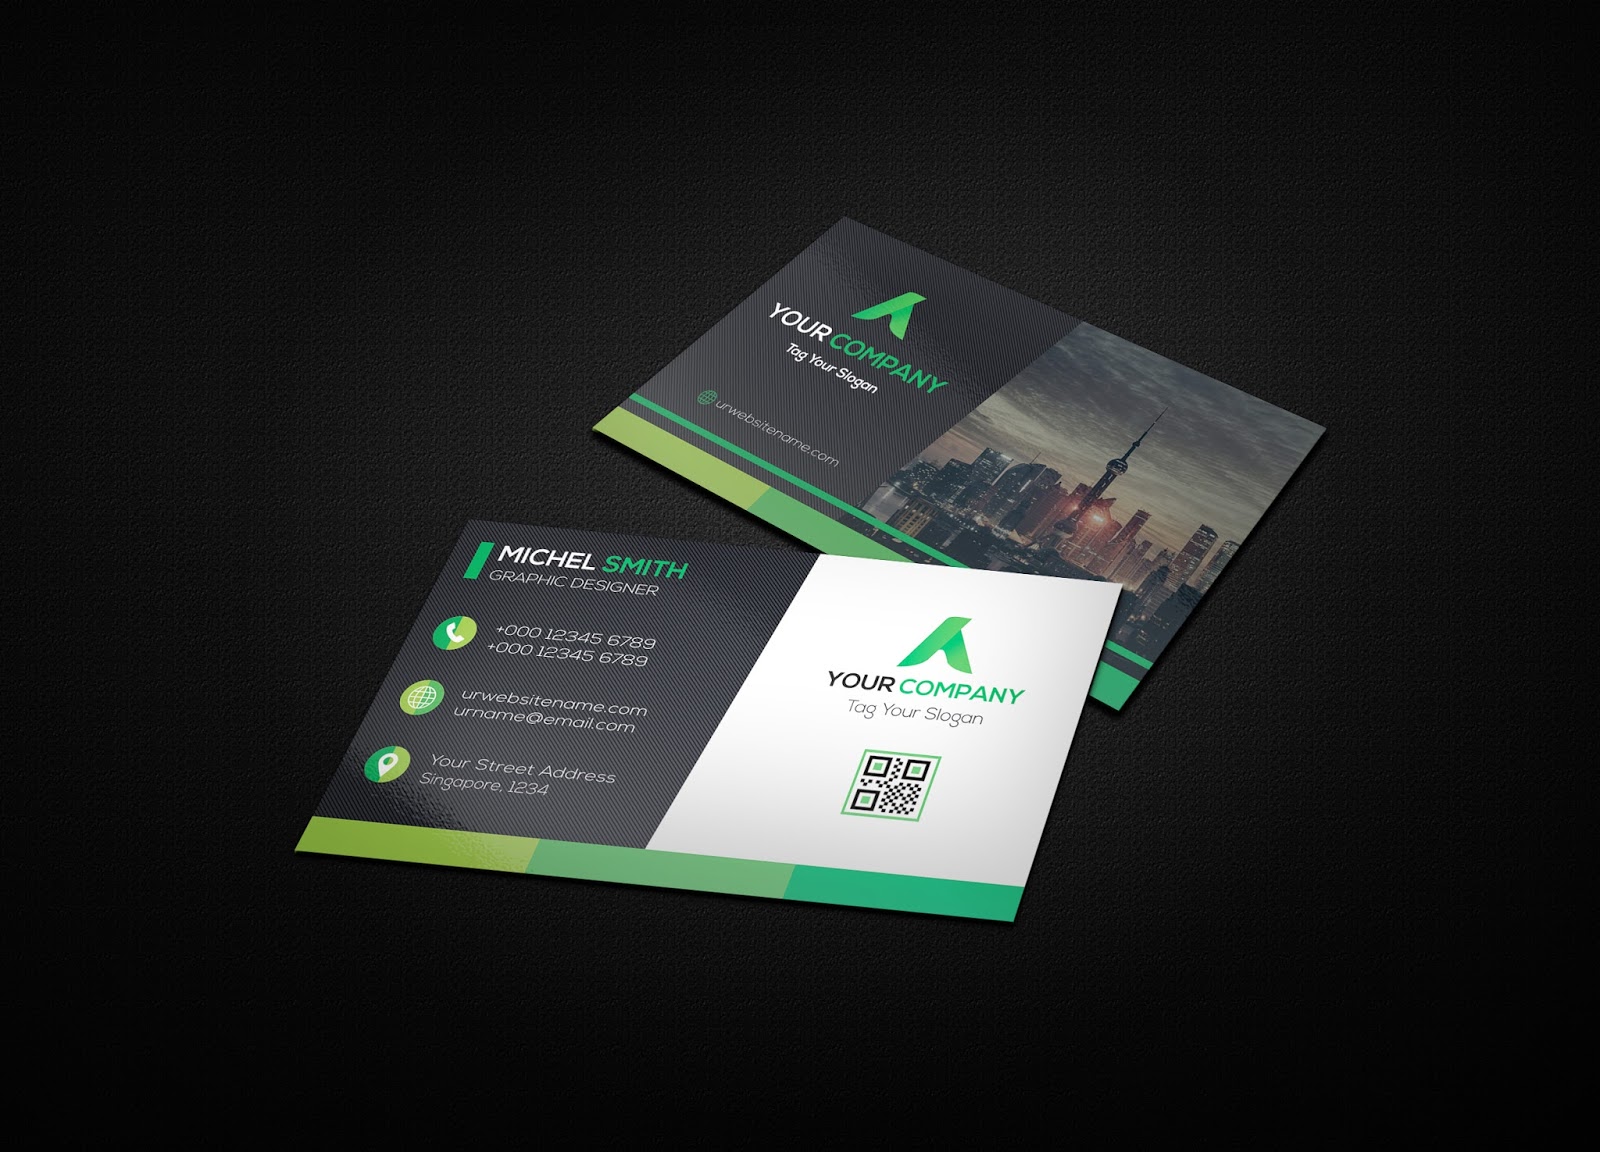 Download 50+ Best Free High-Quality PSD Business Card Mockups | Top ...